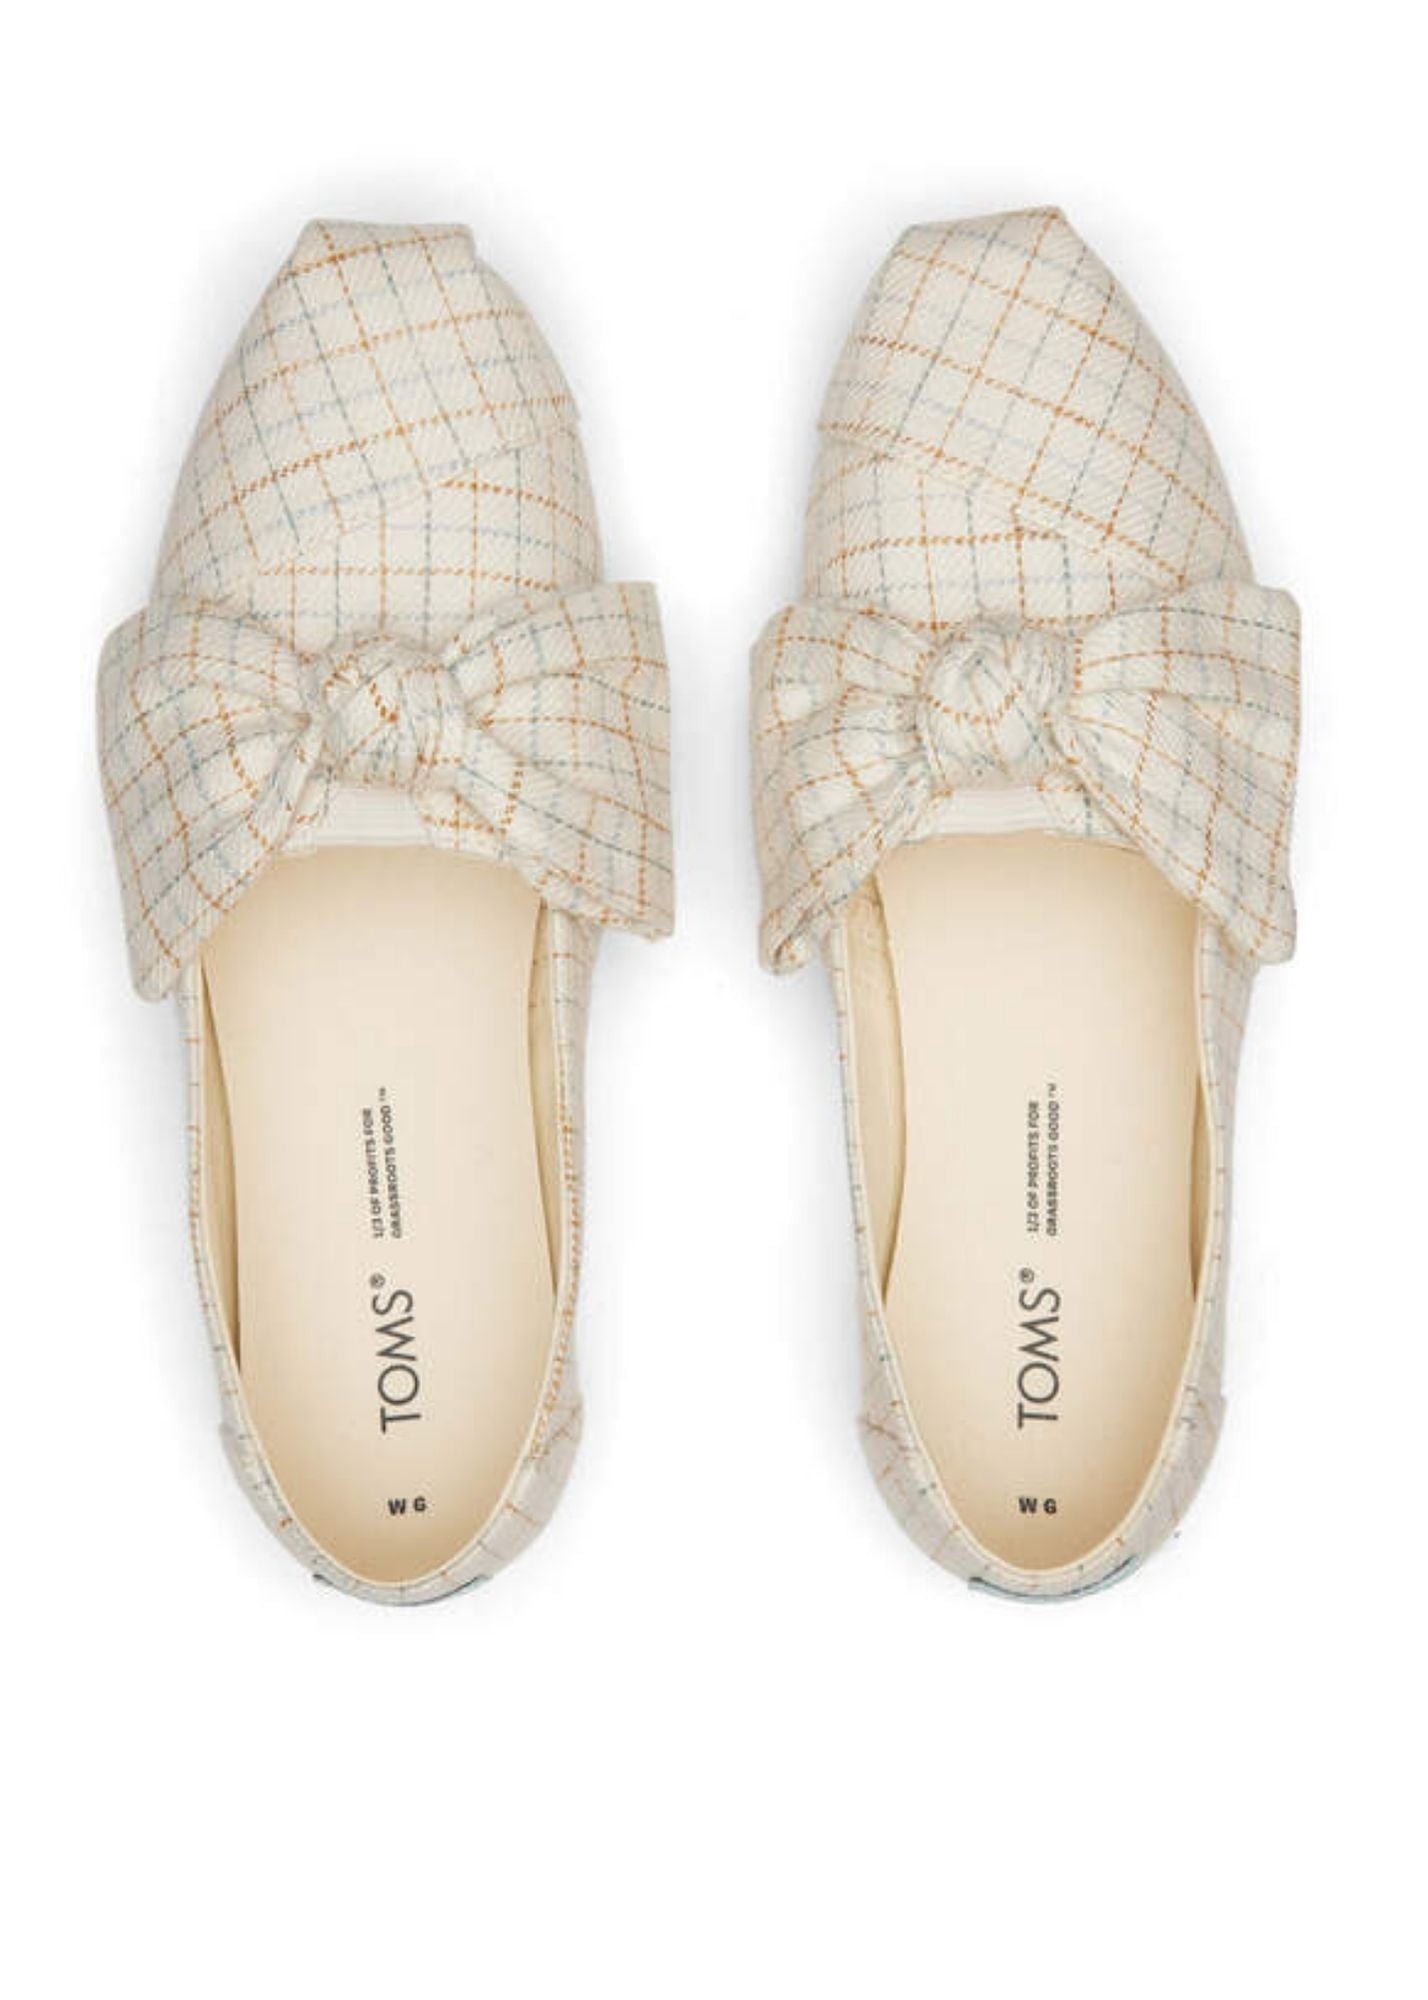 TOMS® Alpargata Checkered Bow Shoes TOMS